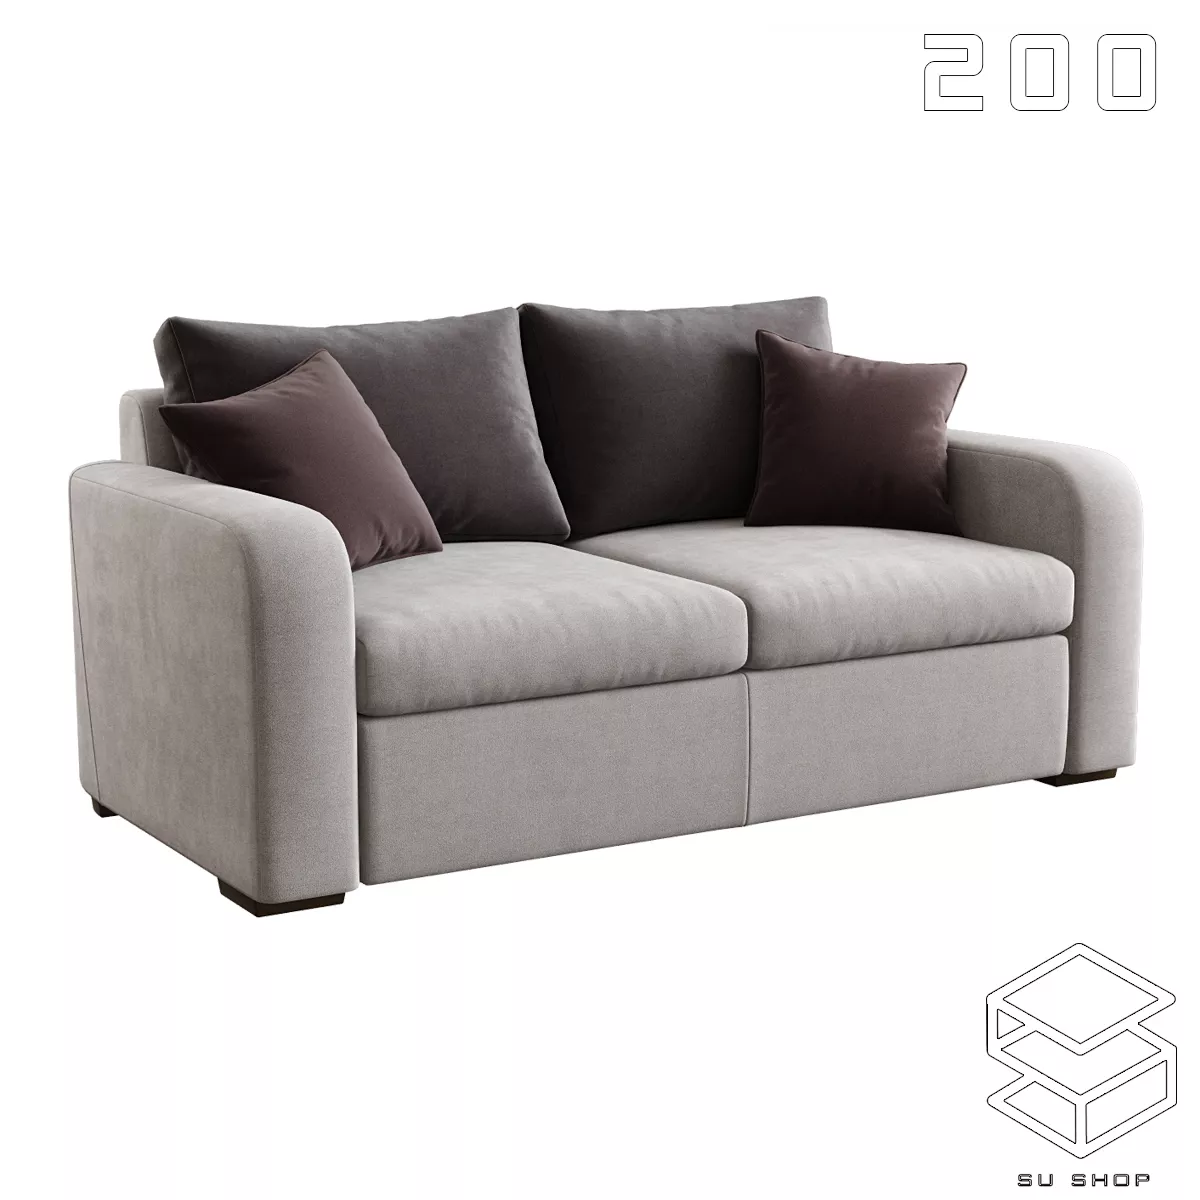 MODERN SOFA - SKETCHUP 3D MODEL - VRAY OR ENSCAPE - ID13498